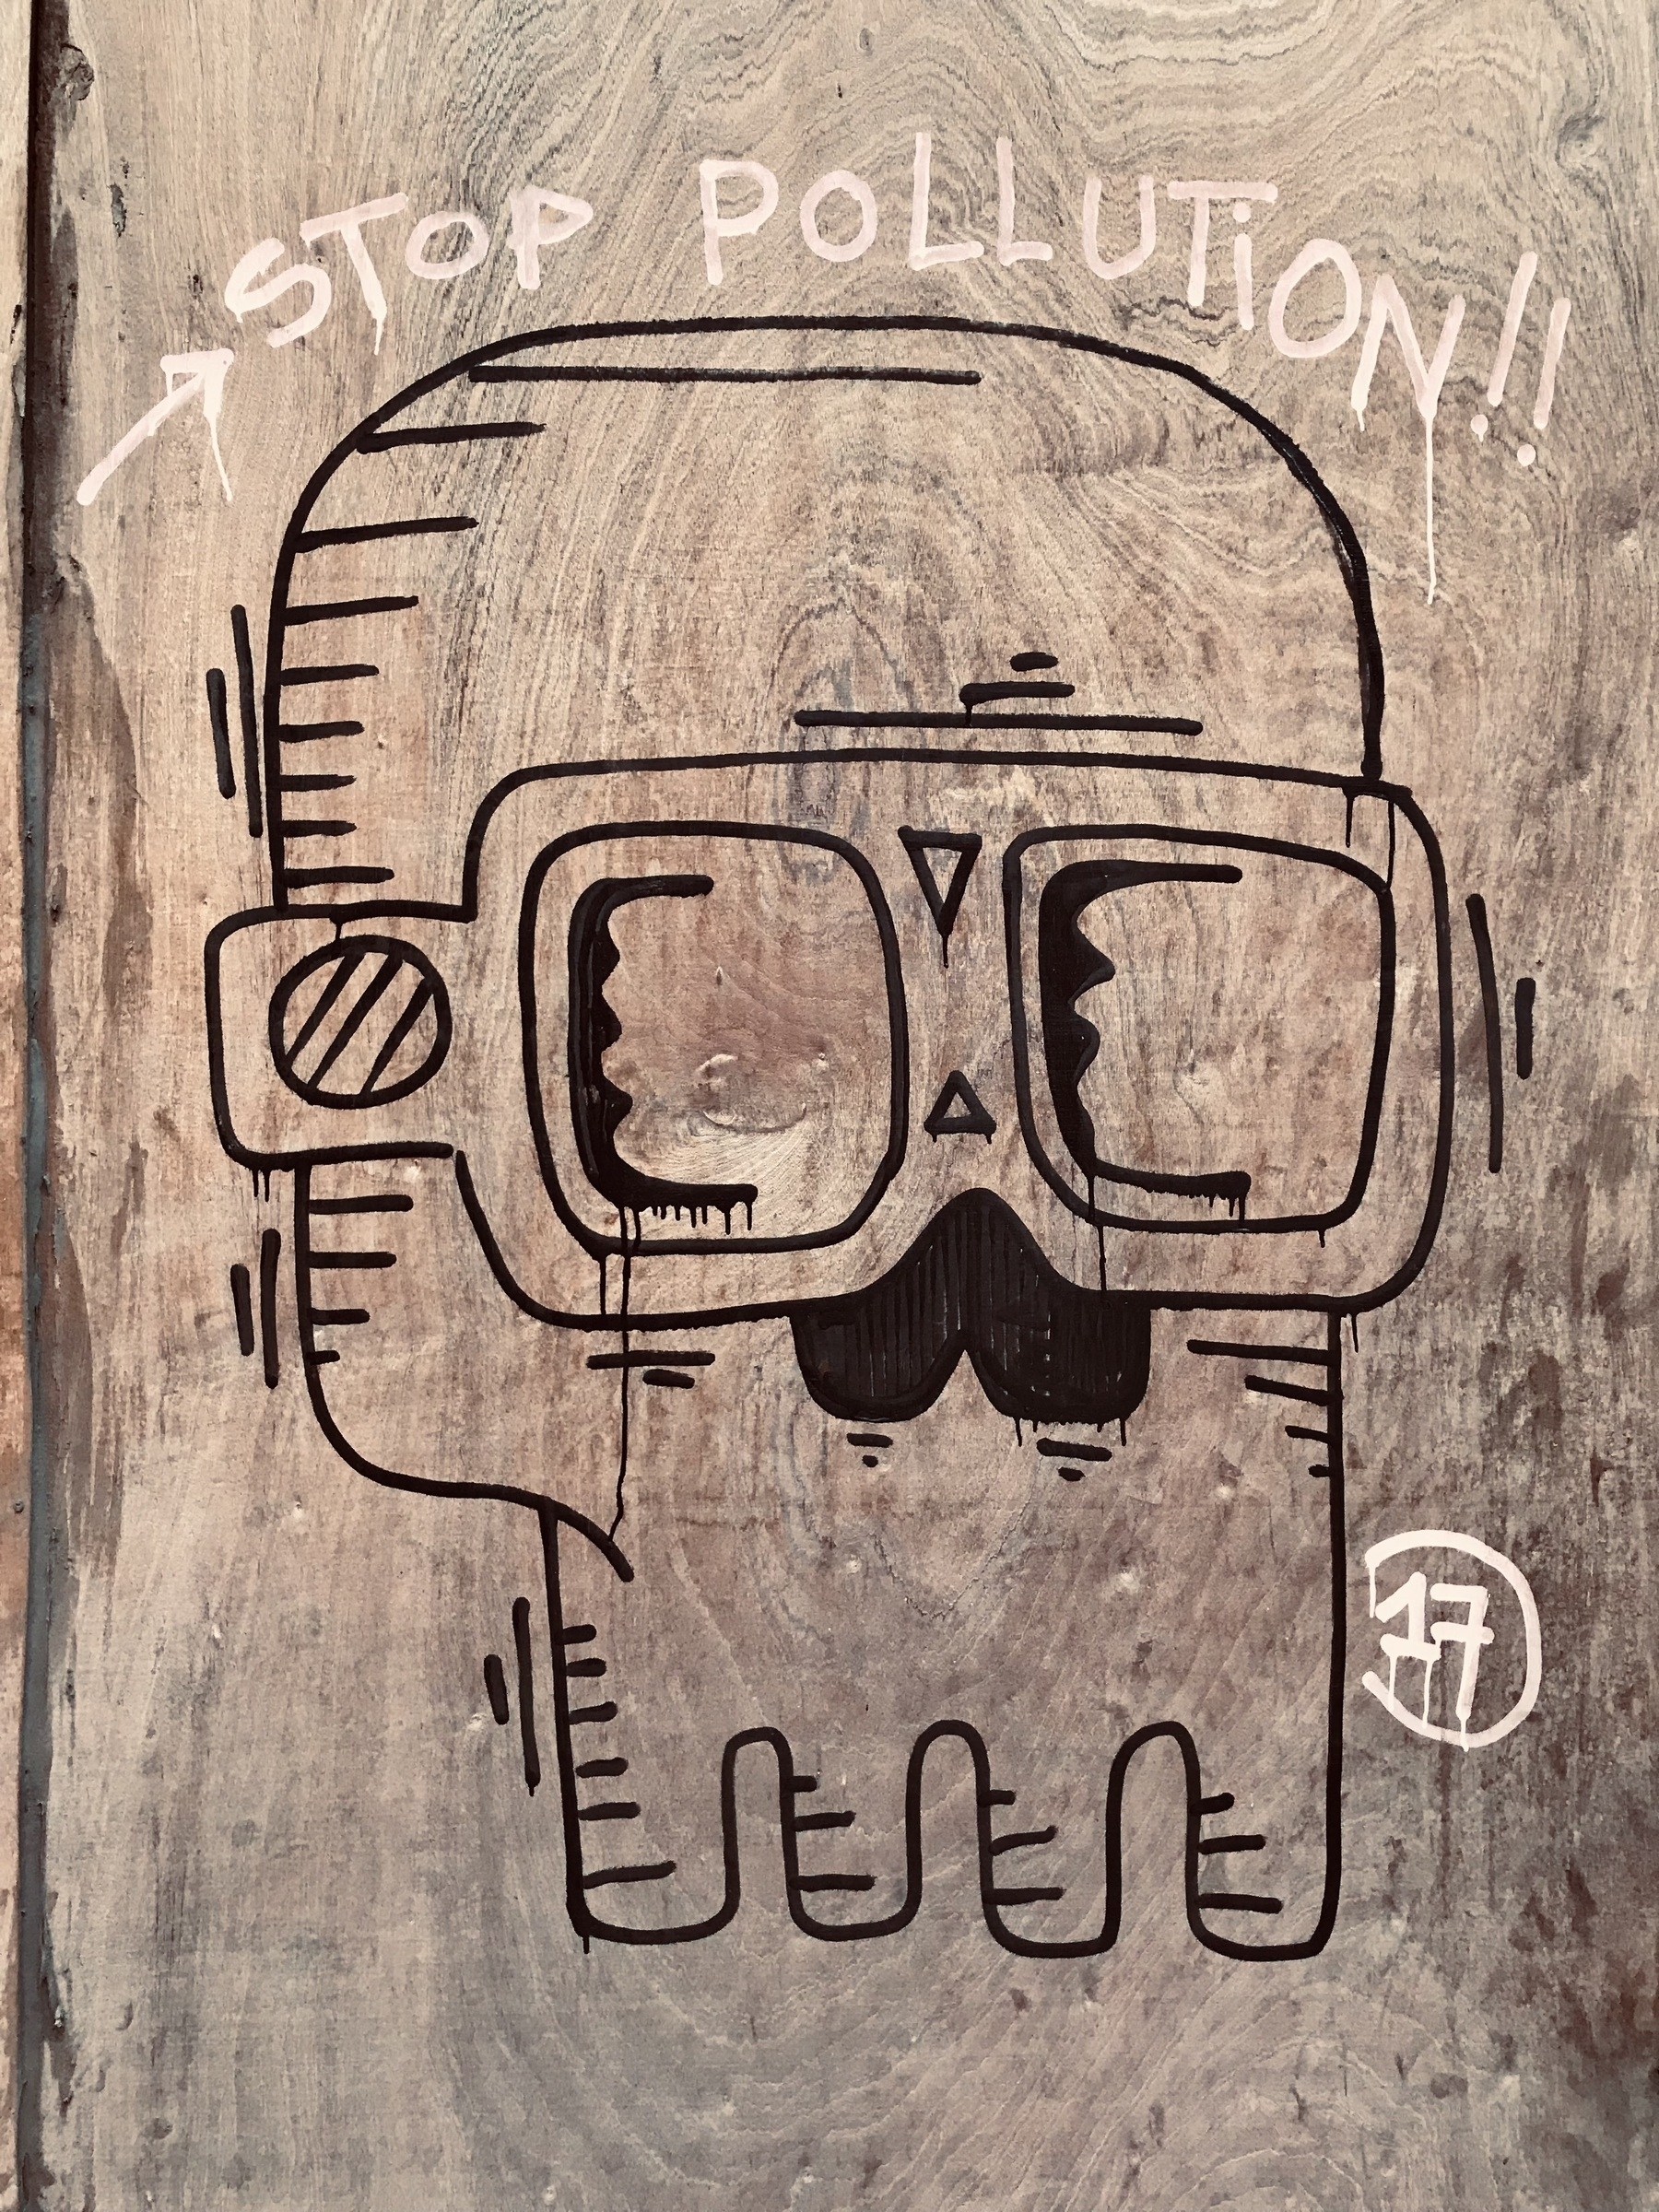 A graffiti skull wearing glasses with the words “stop pollution” above.